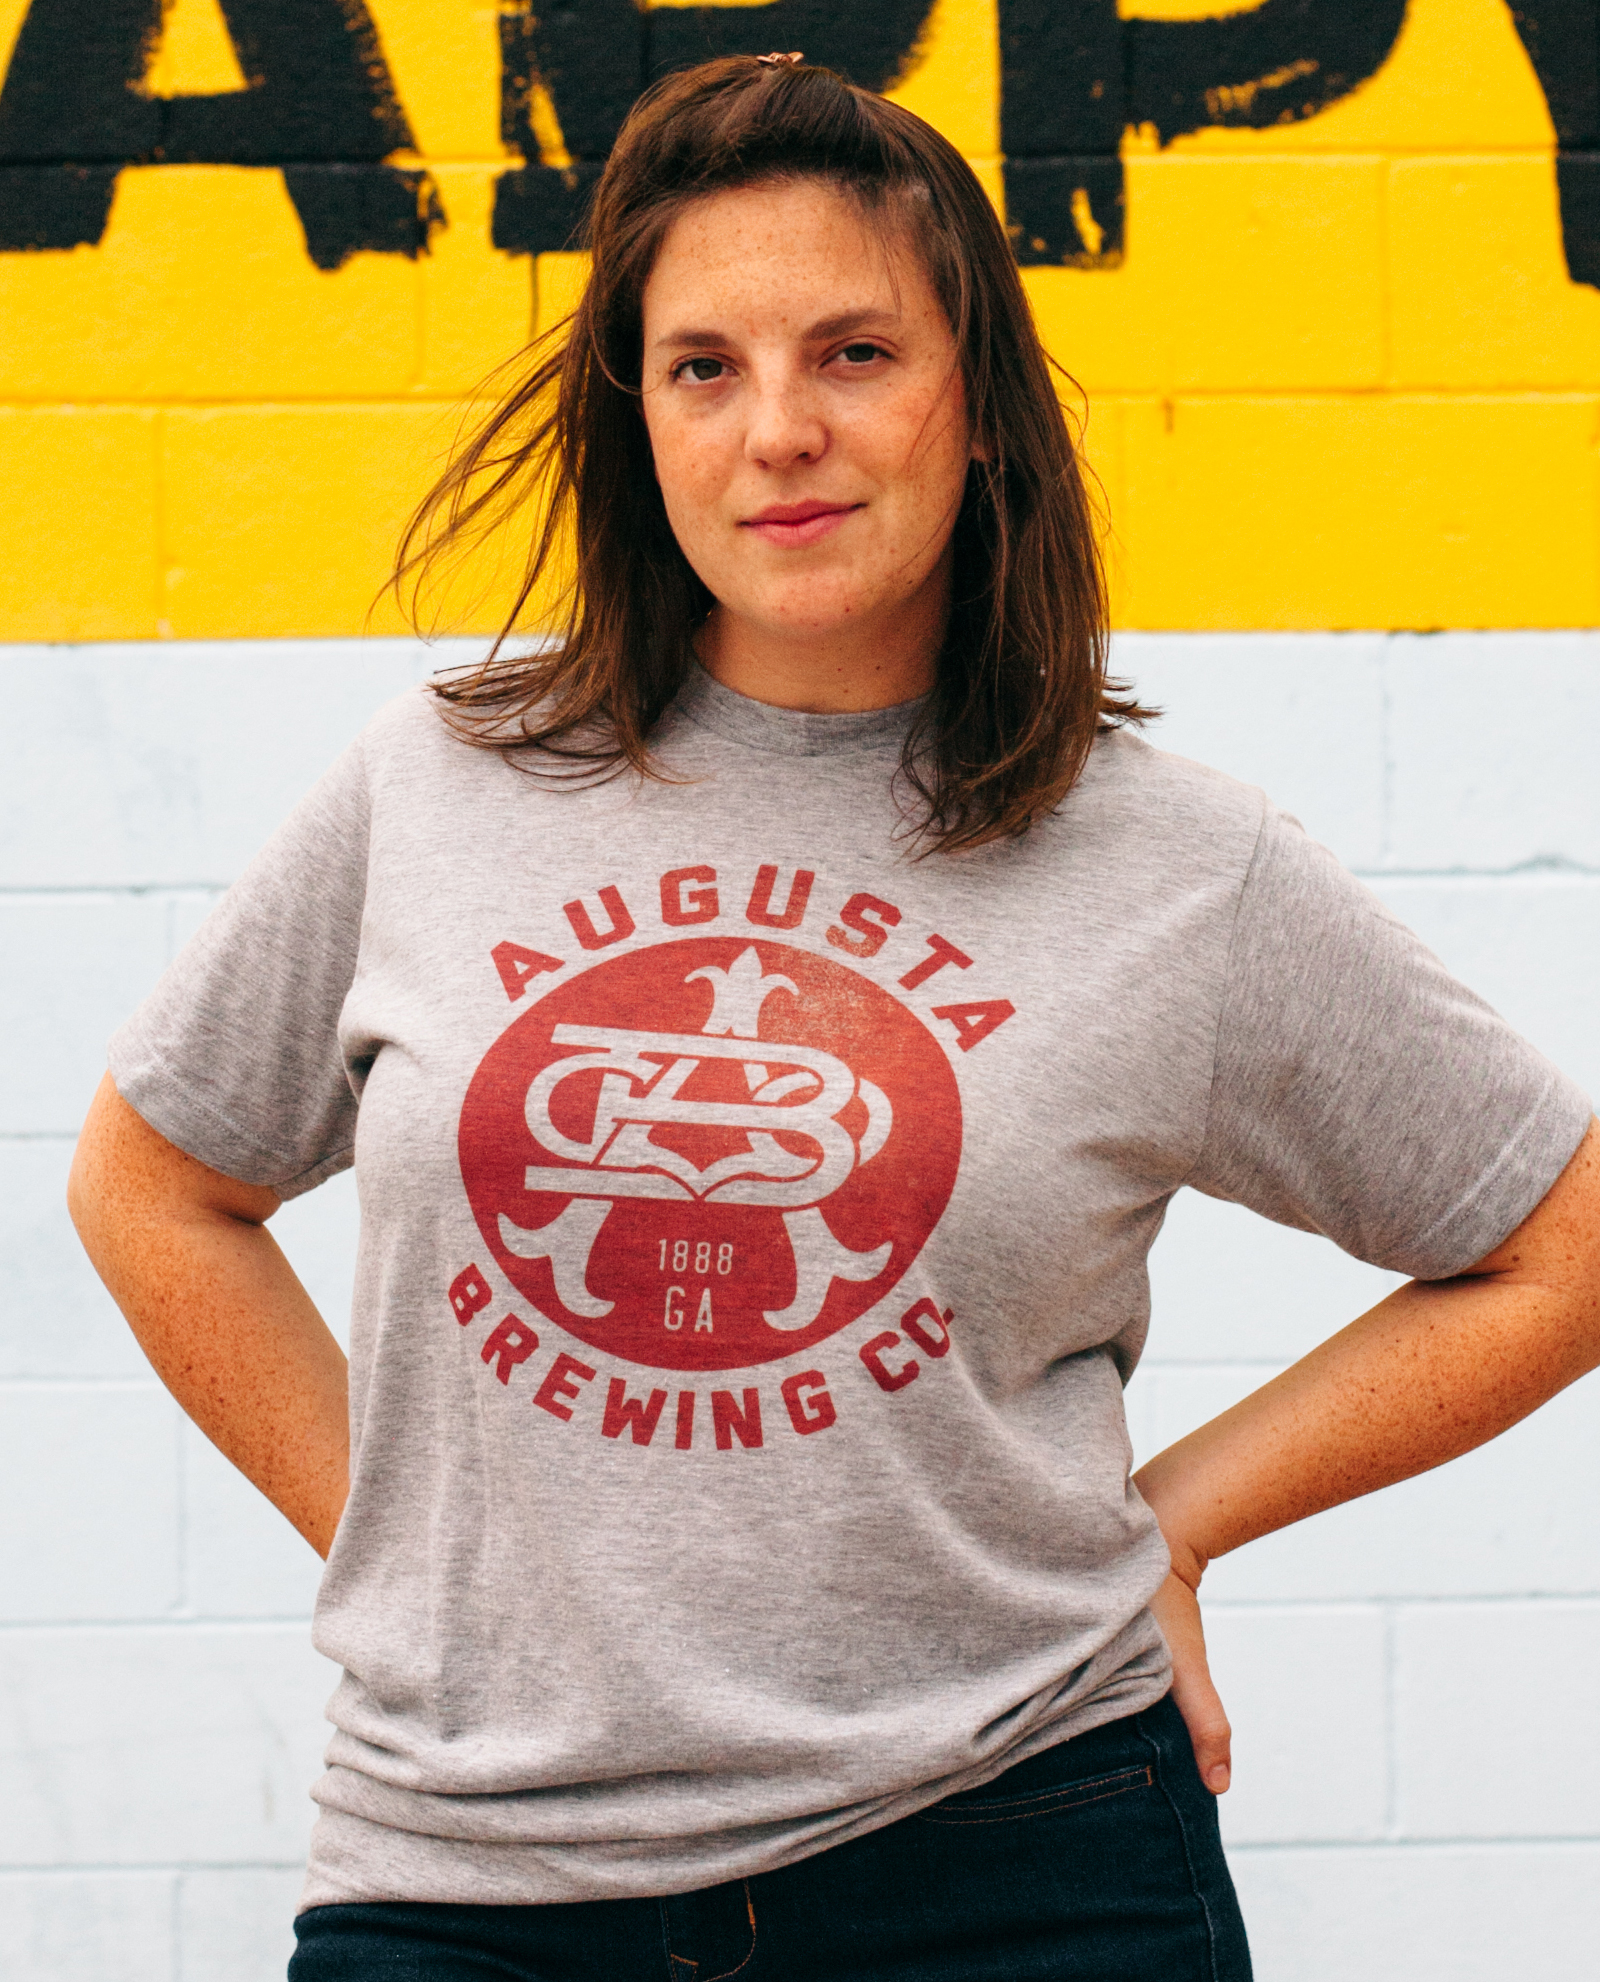 Woman with hands on hips wearing Augusta Brewing shirt